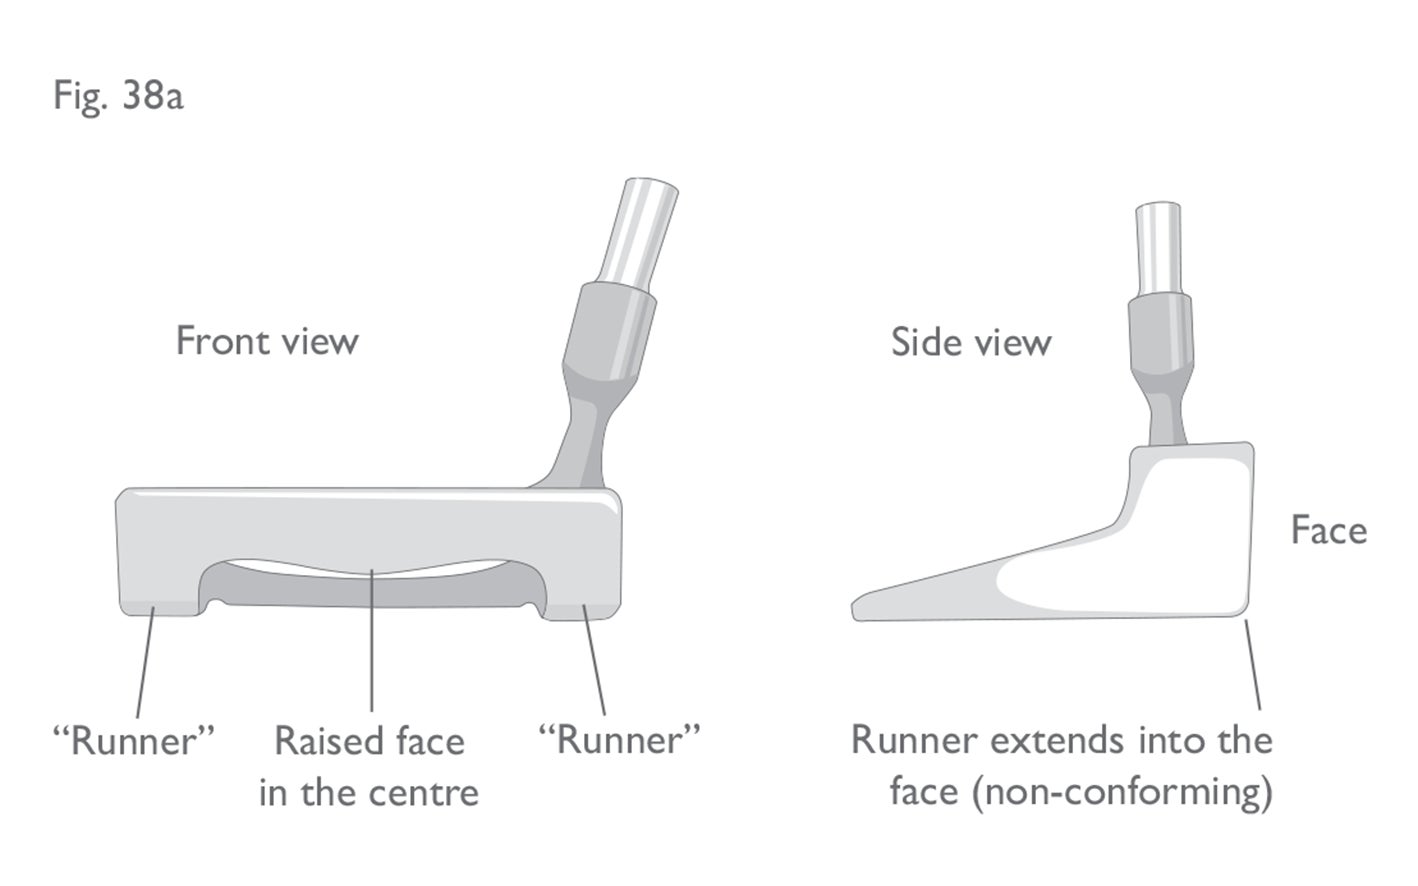 Fig 38 a:  Putter with runners at the heel and toe (non-conforming)